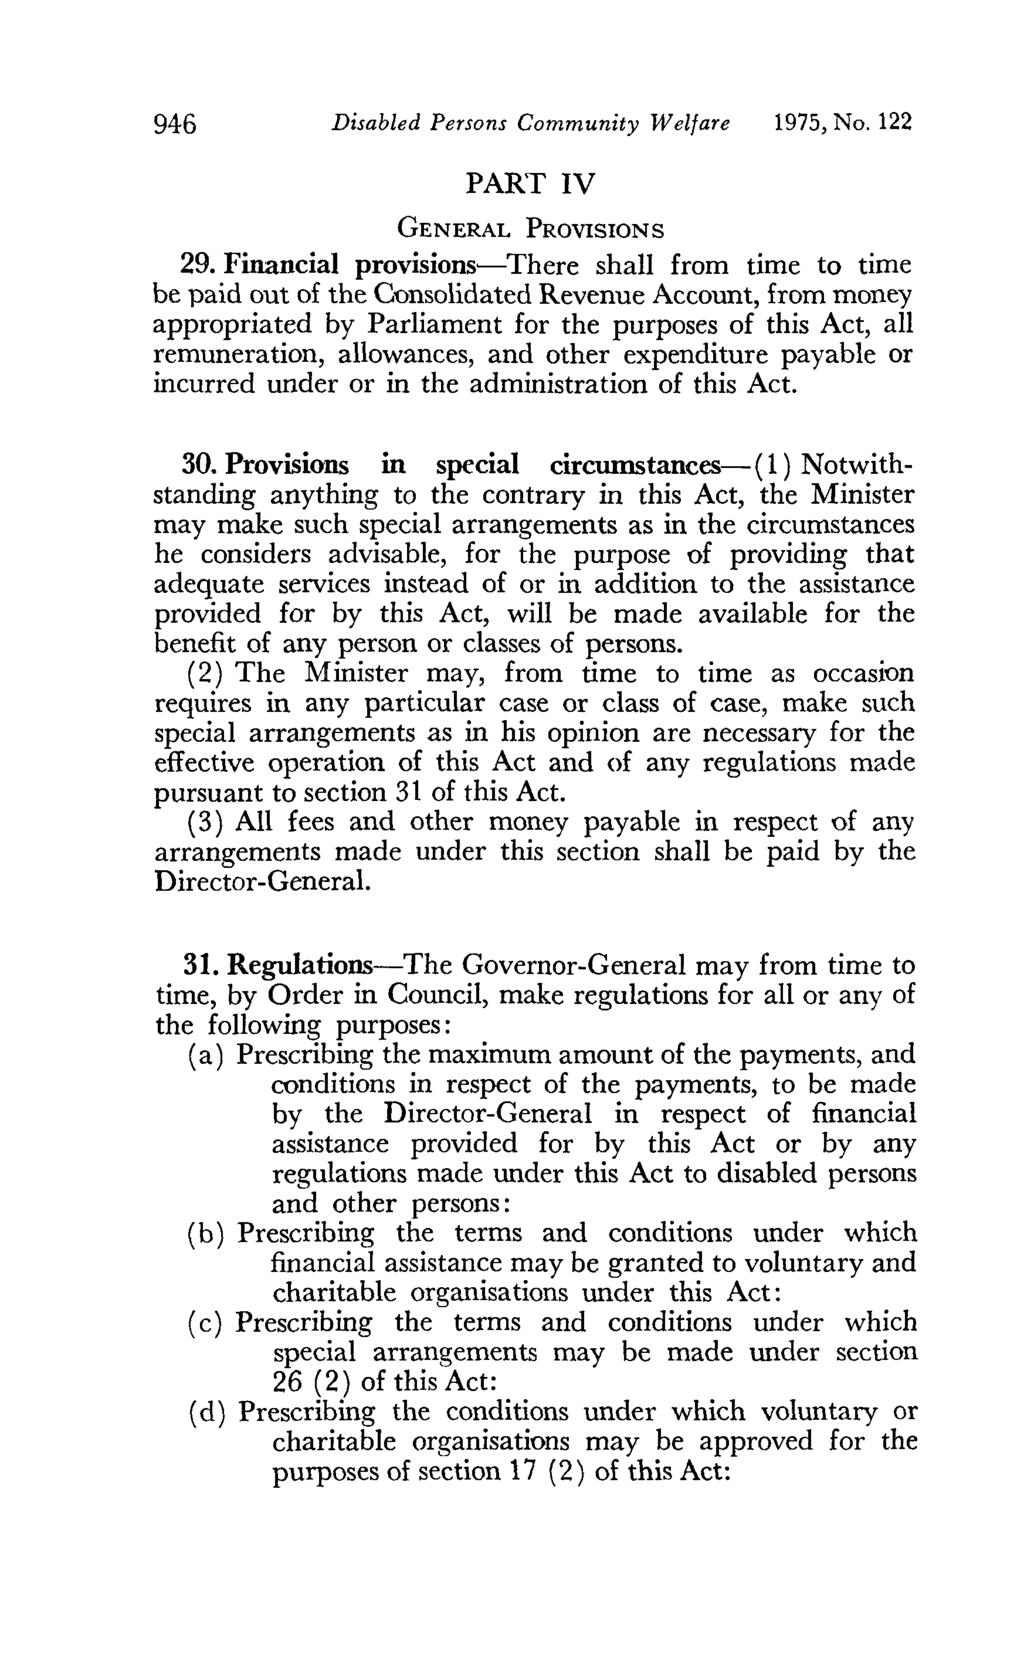 946 Disabled Persons Community Wel/are 1975, No. 122 PART IV GENERAL PROVISIONS 29.